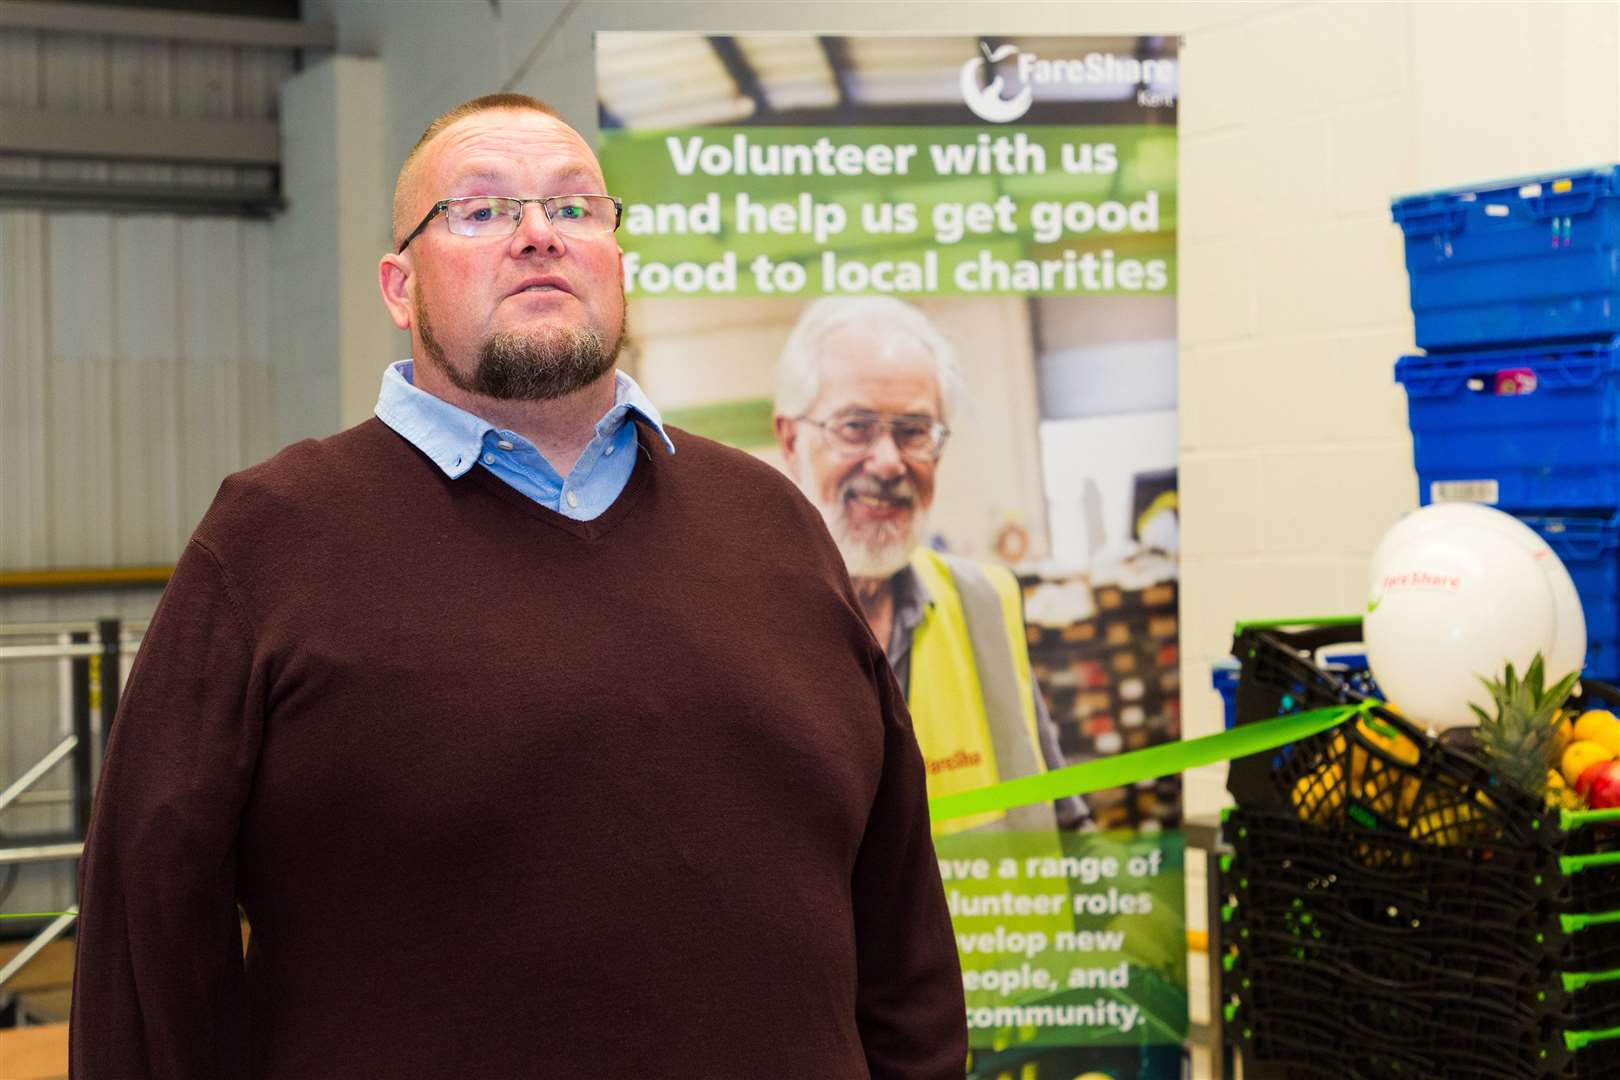 Neil Charlick says his staff are facing "abuse" from people at the food bank